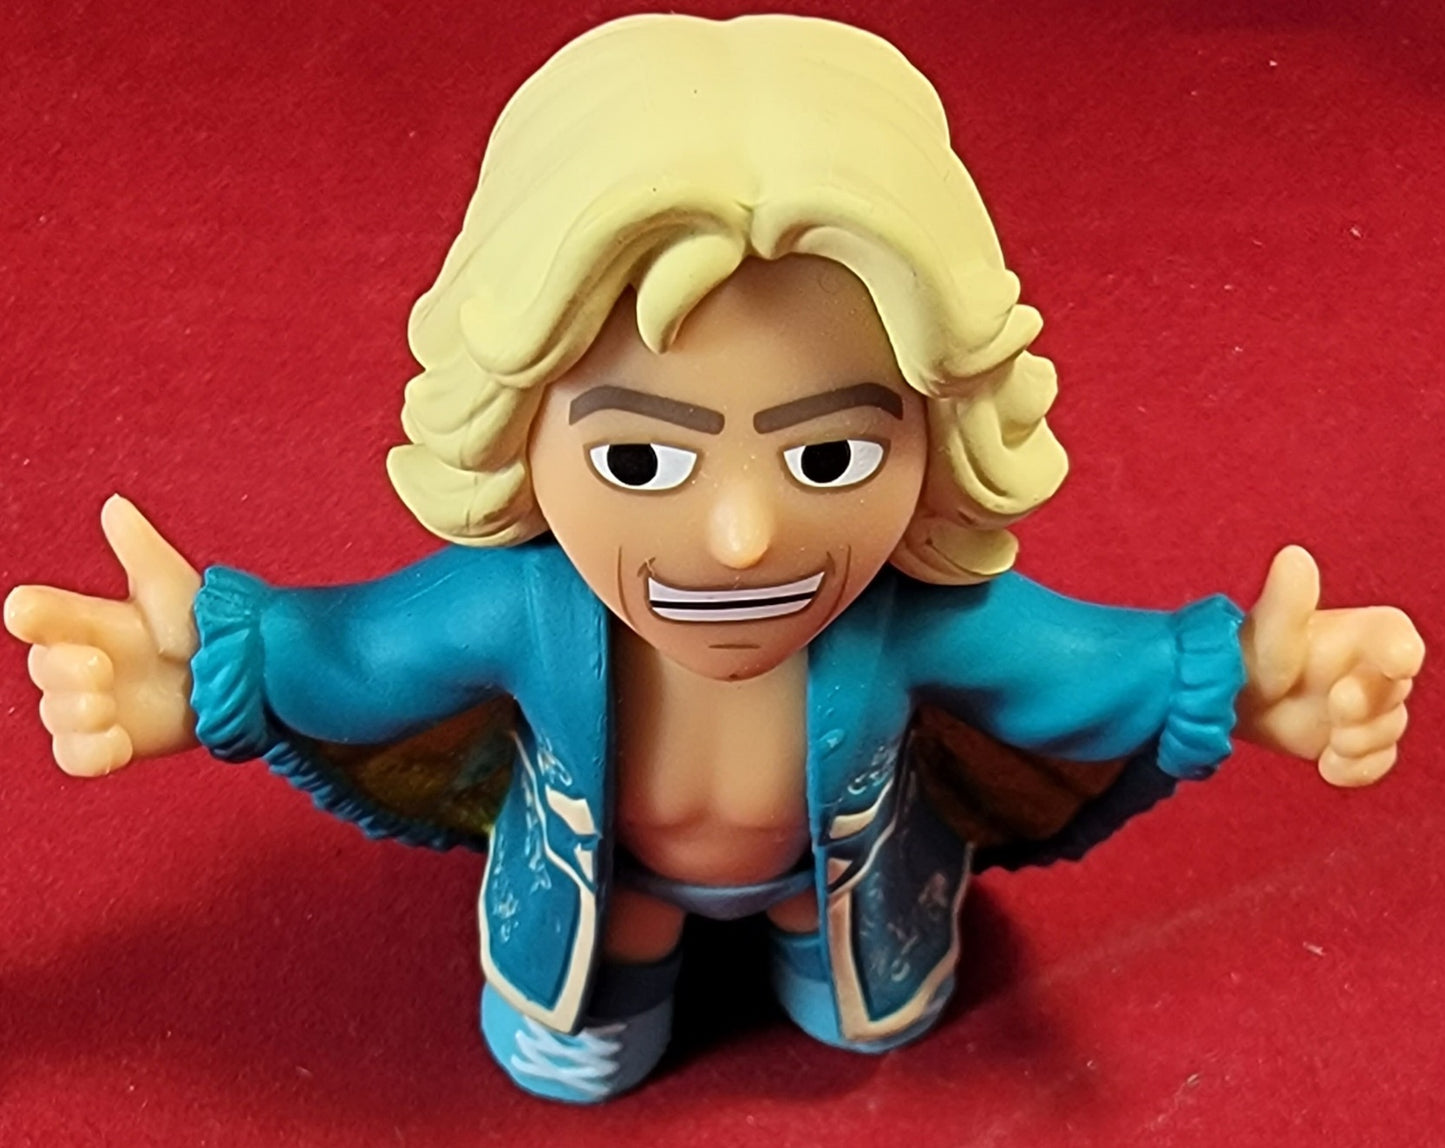 Blind box nature boy ric flair 2015
brand new nature boy ric Flair mini. funko figure is in blue and gold at 3 inches tall and 3 inches at its widest. figure has no flaws and will be delivered in original packaging.